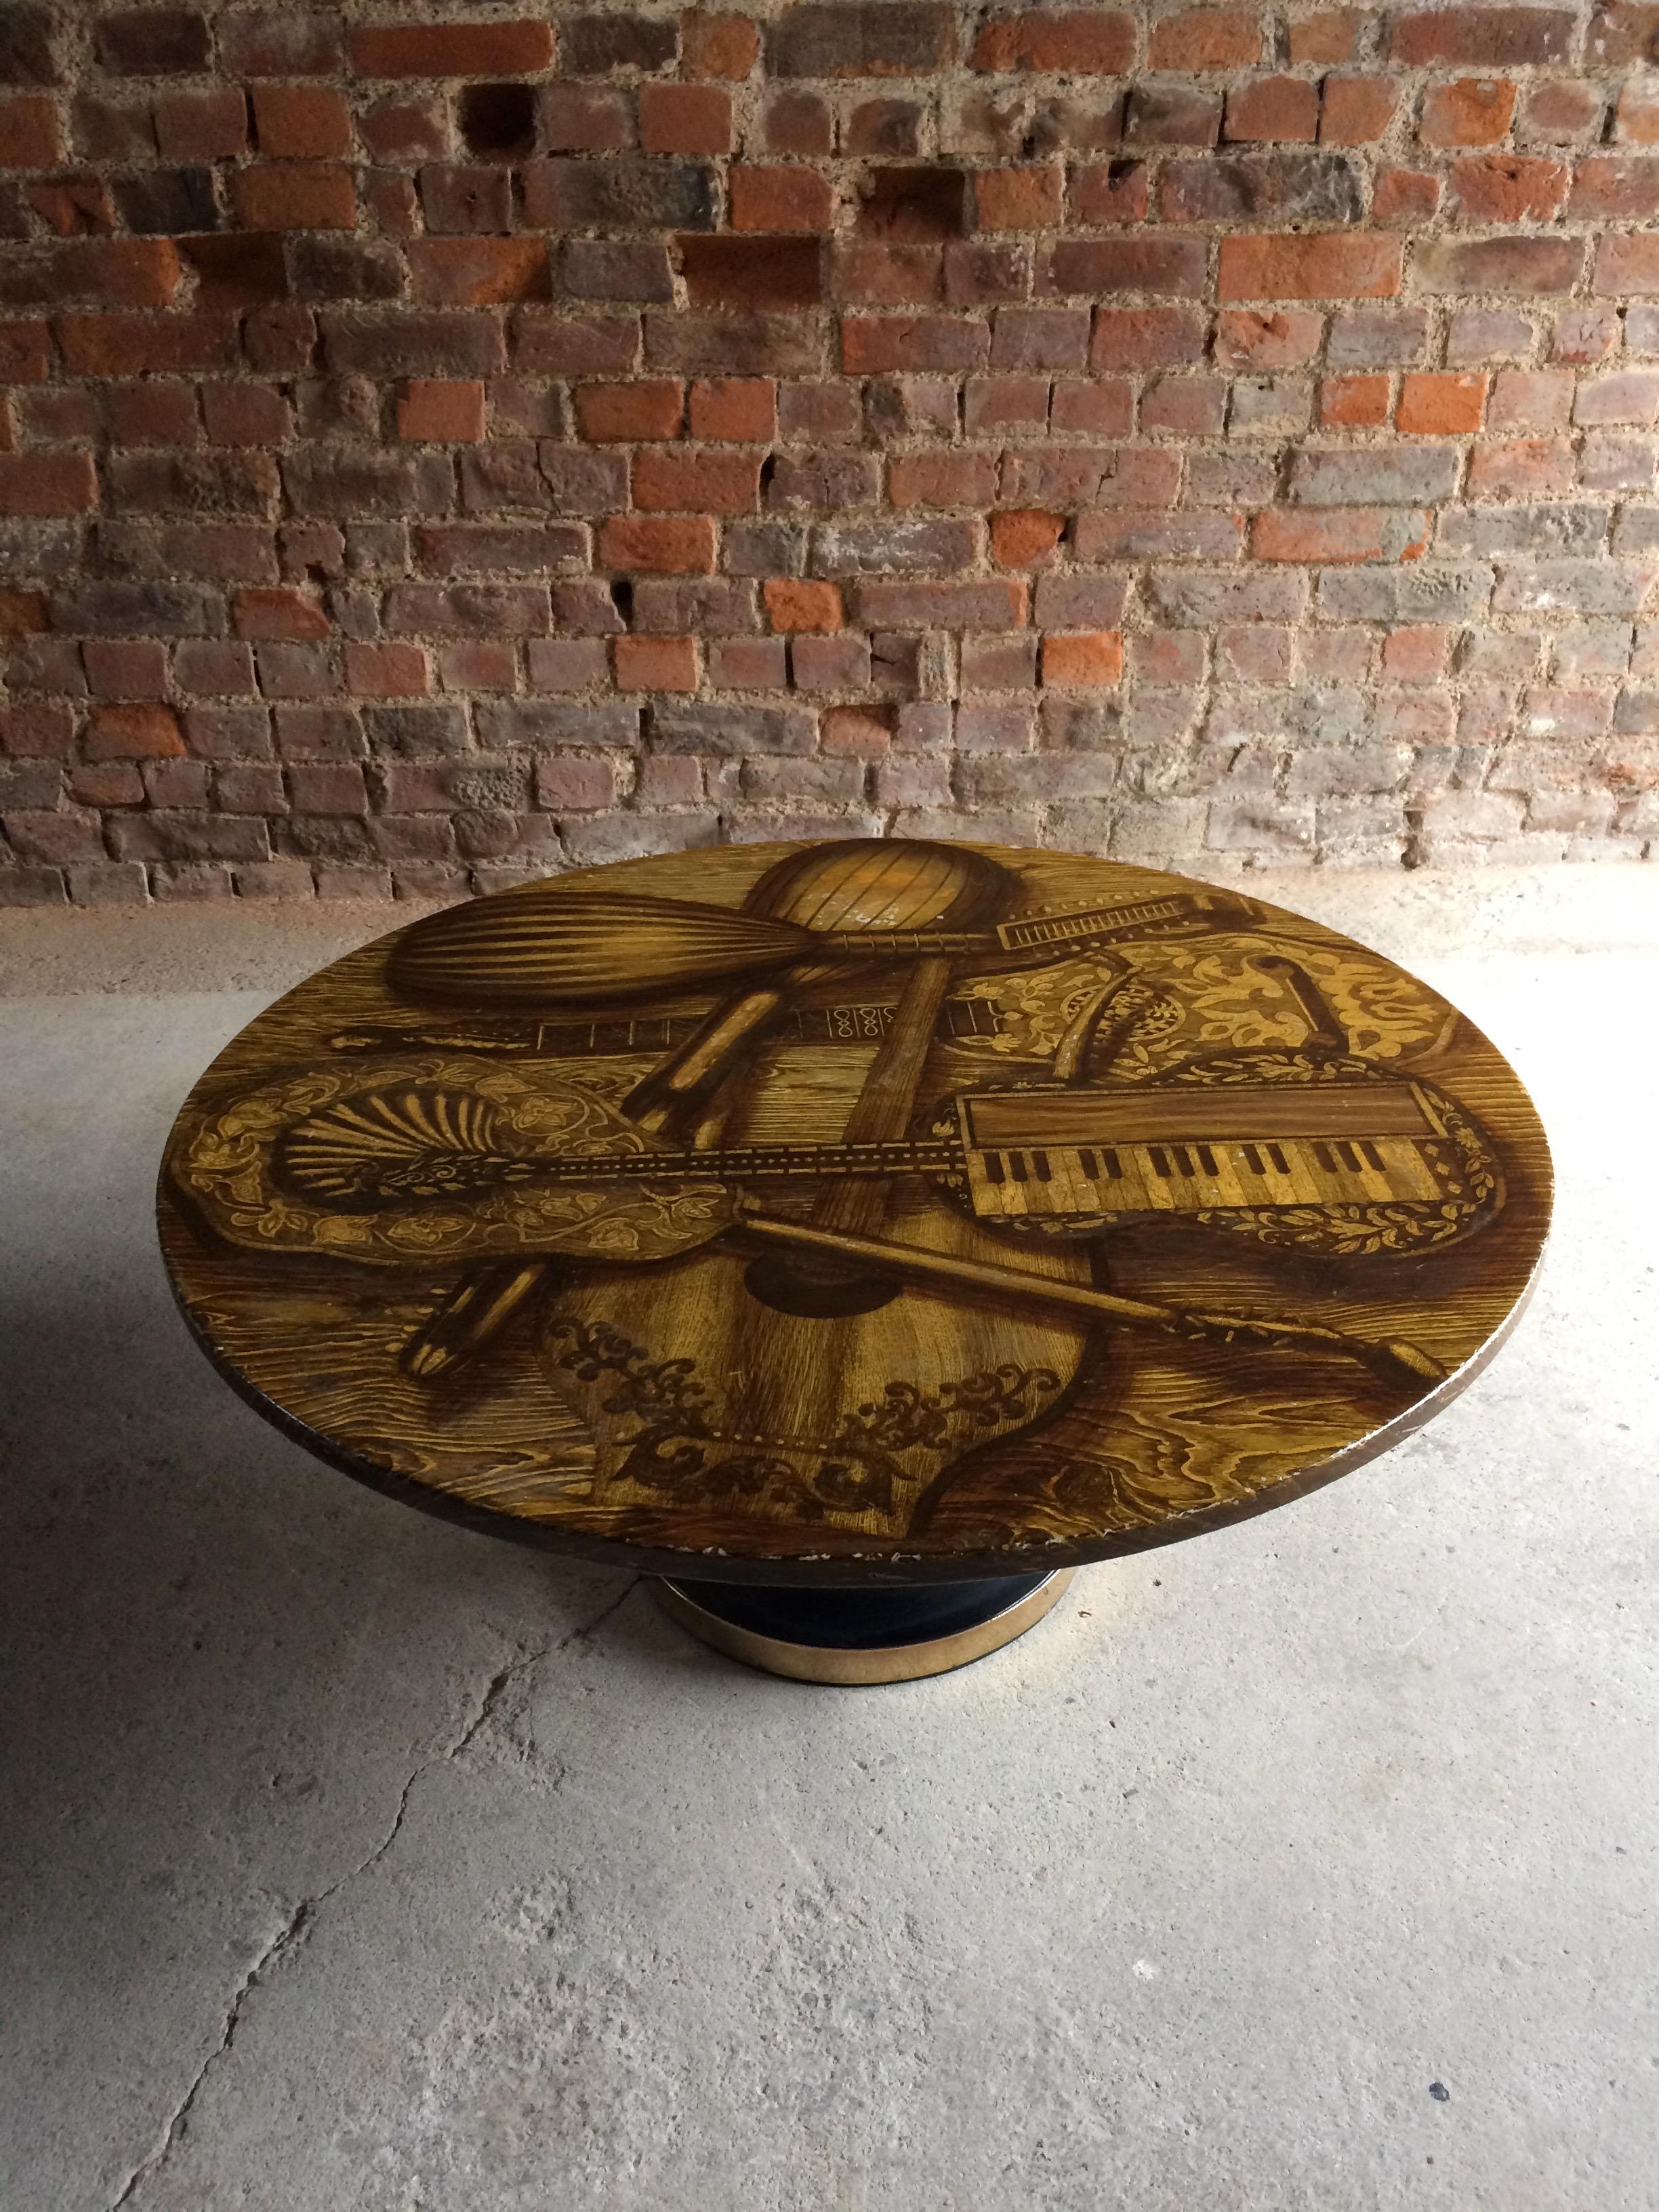 Magnificent Piero Fornasetti, Italy, 1960s circular Musical Instrument coffee table, or 'Strumenti Musicali' with musical instrument design top, on black enamelled metal base with brass strip.

Condition: This item is offered in good original